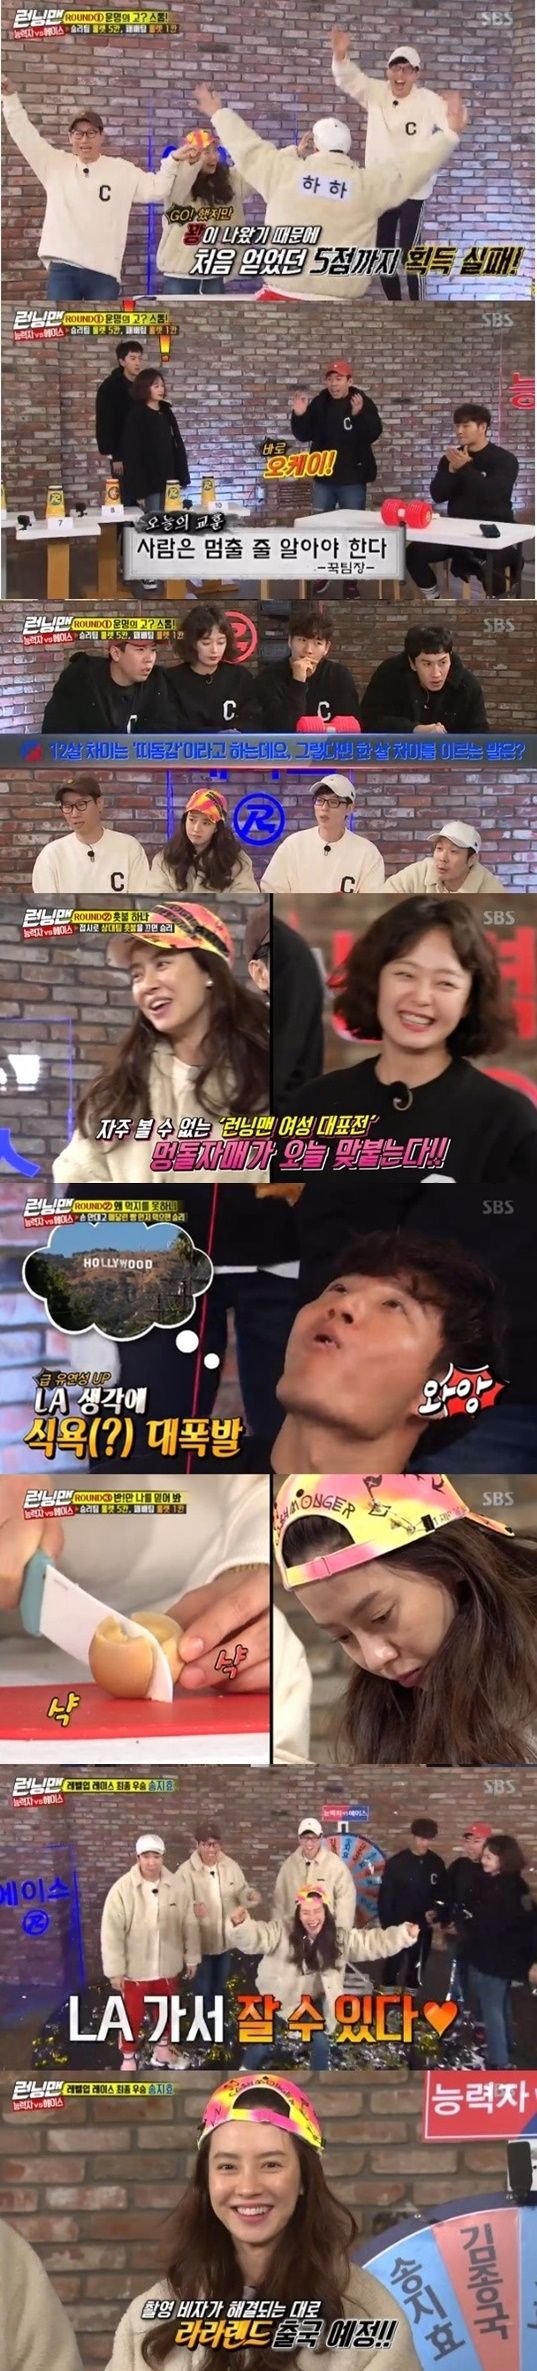 SBS Running Man ratings rose vertically in the confrontation between Ace Song Ji-hyo and Ability Kim Jong-kook.According to Nielsen Korea, the average rating of Running Man, which was broadcast on the 10th, was 5.9% in the first part and 8.1% in the second part (based on the audience rating of households in the metropolitan area), which was 2.2% p higher than last week.The highest audience rating per minute rose to 9.8%, which is close to 10%, and the 2049 target audience rating, which is an important indicator of major advertising officials, ranked first in the same time zone with 5.4% (based on two-part ratings).On this day, the first project of the new year, Race Level Up Race winner Ace Song Ji-hyo and Ability Kim Jong-kook were intrigued by the confrontation.The winner was able to pick one of the team members and get the luck of going on a trip to LA together, while Song Ji-hyo and Kim Jong-kook announced their respective LA travel plans.As a team, Song Ji-hyo, Yoo Jae-Suk, Ji Suk-jin, Haha, and the talented team consisted of Kim Jong-kook, Lee Kwang-soo, Yang Se-chan and Jeon So-min.The three-round showdown was won by Roulette Khan following round-by-round victories, and each team was tense with a fierce confrontation. Round 1 Go of Destiny? Stop!, Yoo Jae-Suk and Lee Kwang-soos Kangson Parade followed, but Ace team won in the performance of Goldson Song Ji-hyo.The second round was a game victory for the Ace team, but the Ace team did not overturn the dominance, and the third round also took the Ace team to victory.Song Ji-hyo, who took more roulette compartments, turned roulette into a final showdown with Kim Jong-kook, and Roulette stopped in Song Ji-hyos name, and the Ace team won the final.The scene jumped to 9.8% of the highest audience rating per minute and became the best one minute.